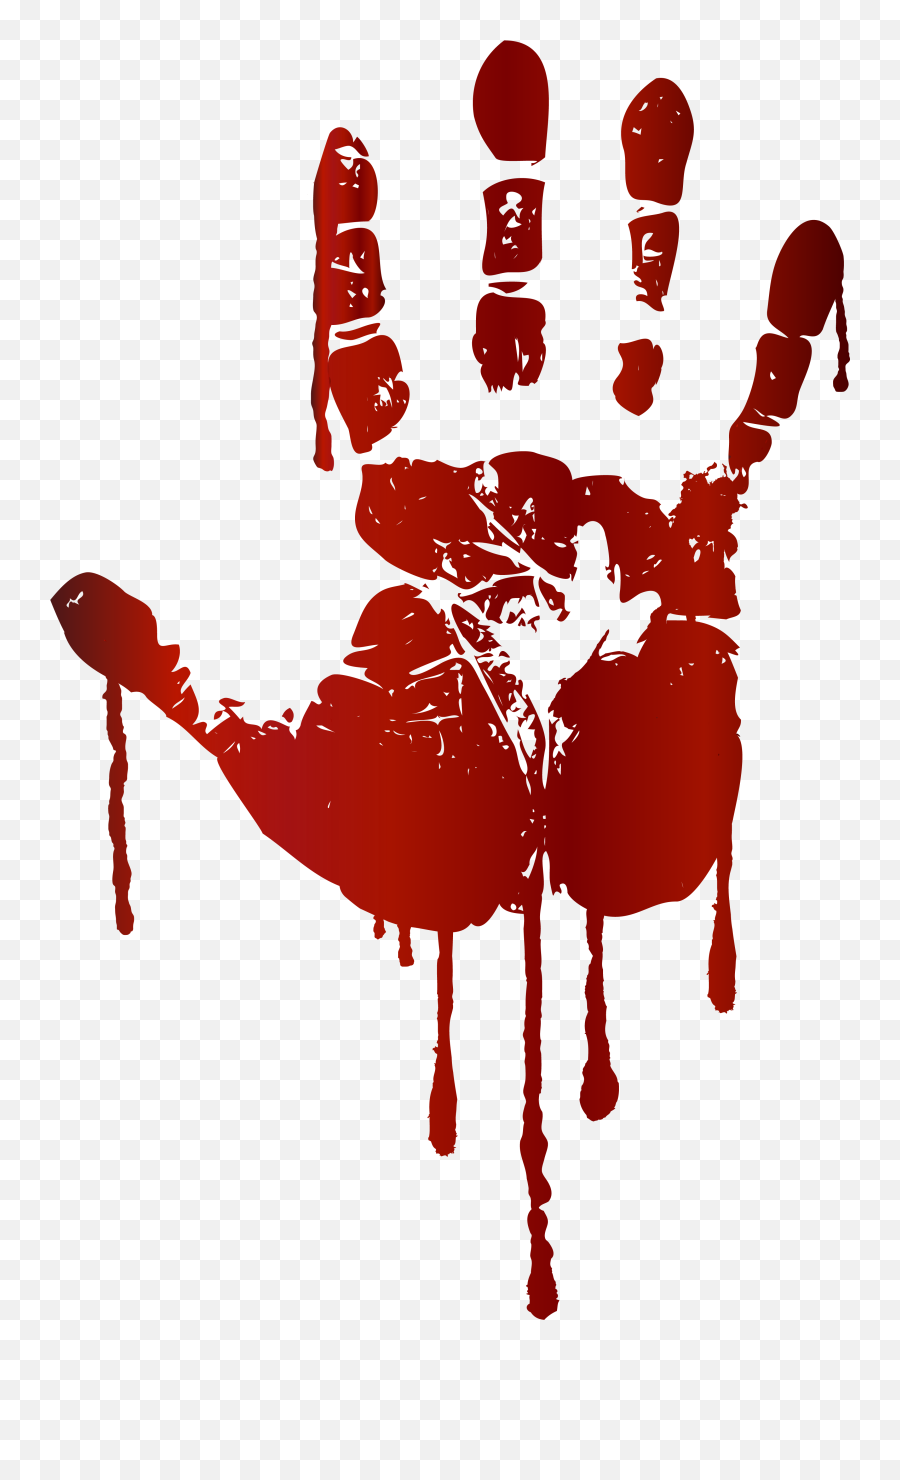 Bloody Handprint Png Images Collection For Free Download - Bloody Handprint Clipart,Zombie Hands Png